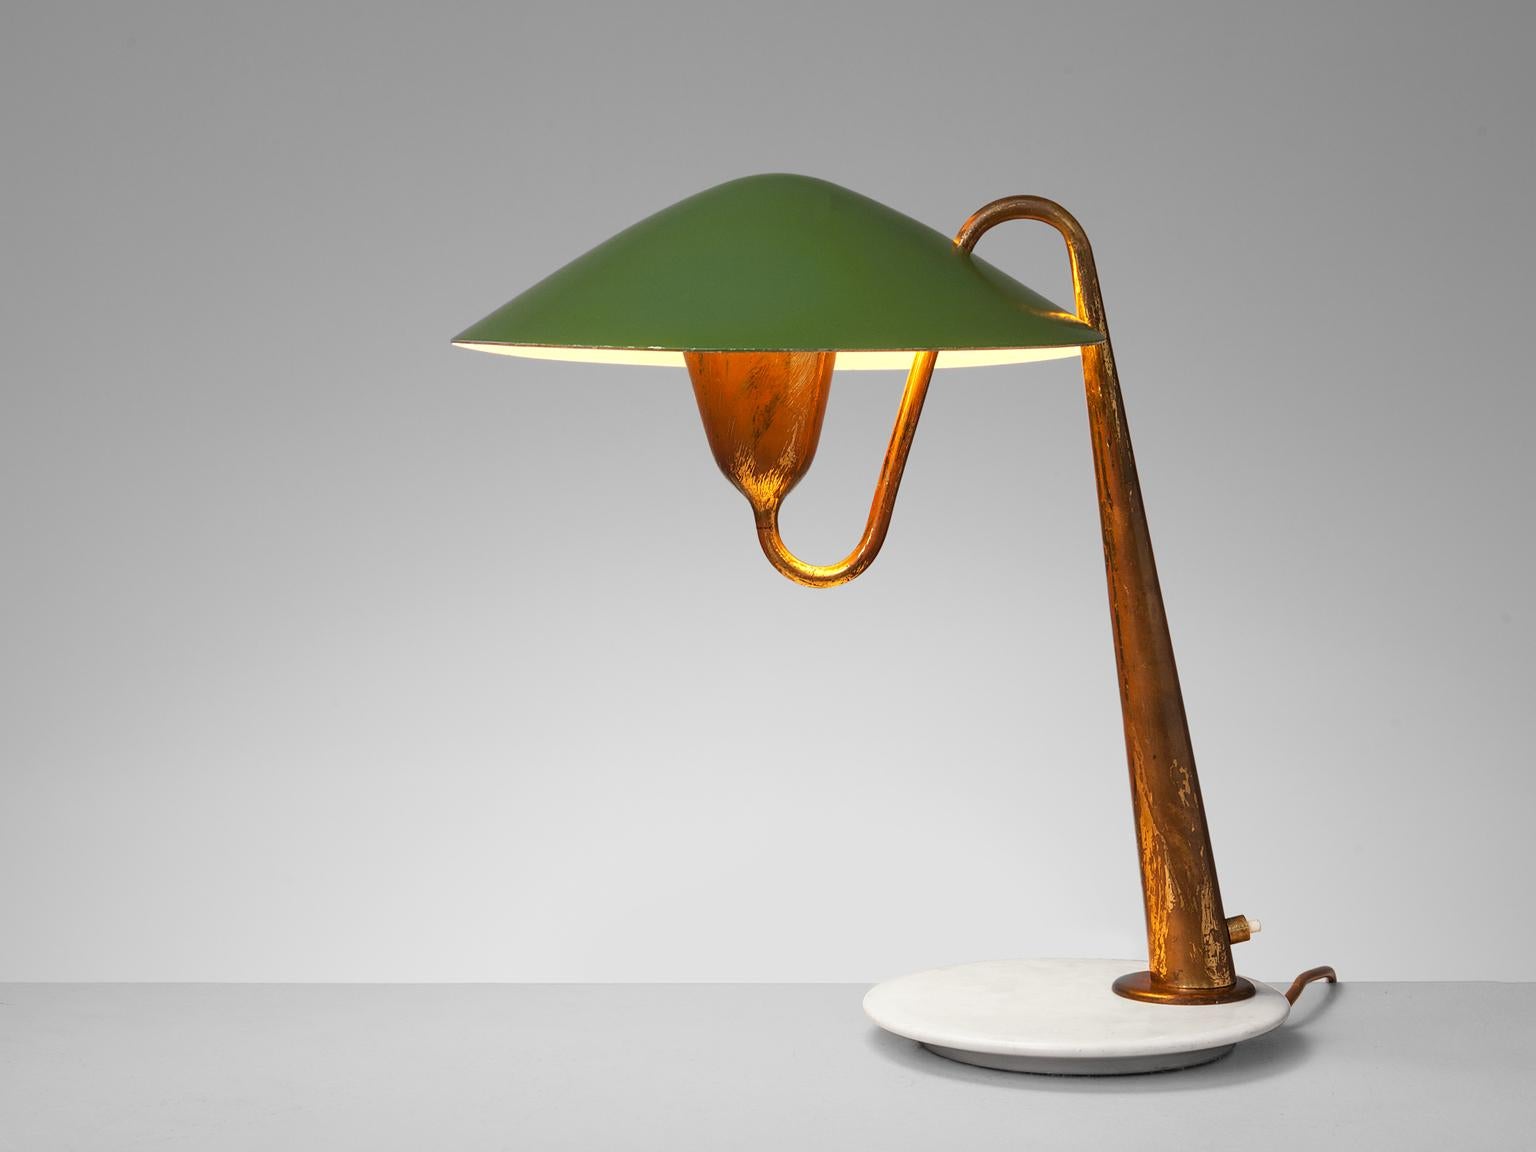 Table lamp, in brass, green coated metal, Italy, circa 1950.

This wonderful curved brass desk light features a brass body and a green coated shade. The stem of the light features multiple soft curves. The end of the stem ends in a cone shape above